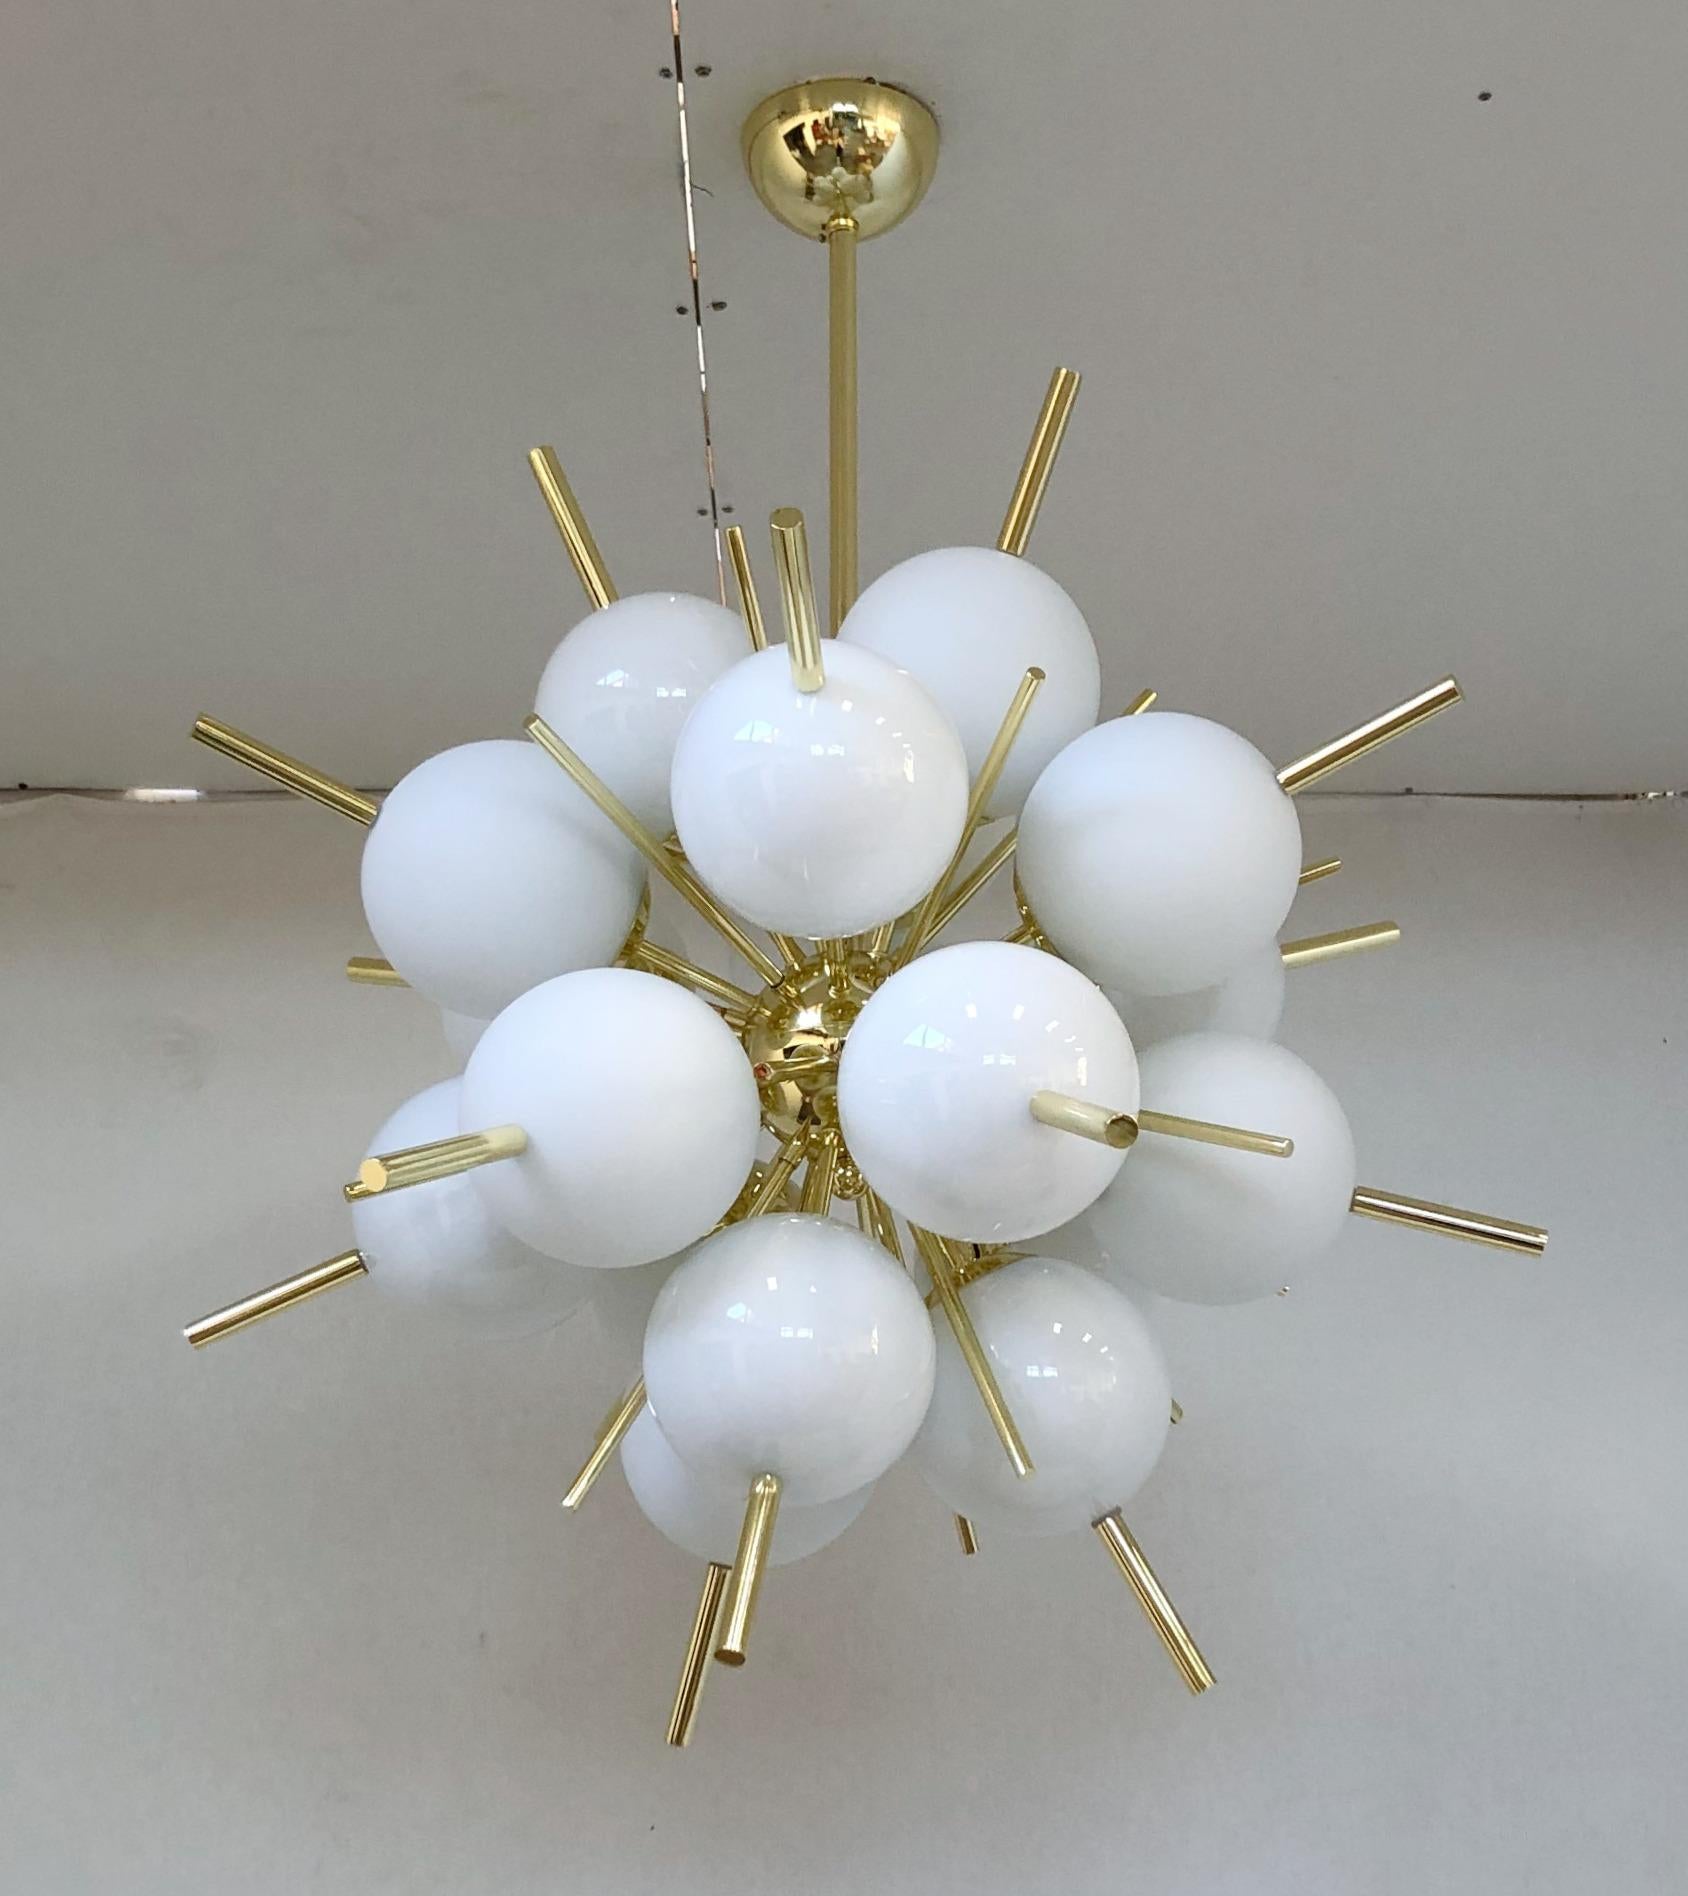 Italian sputnik chandelier with 18 Murano glass globes and brass cylinder spikes, mounted on metal frame in light gold plated finish / Designed by Fabio Bergomi for Fabio Ltd / Made in Italy
Measures: Diameter 28 inches, height 34 inches including